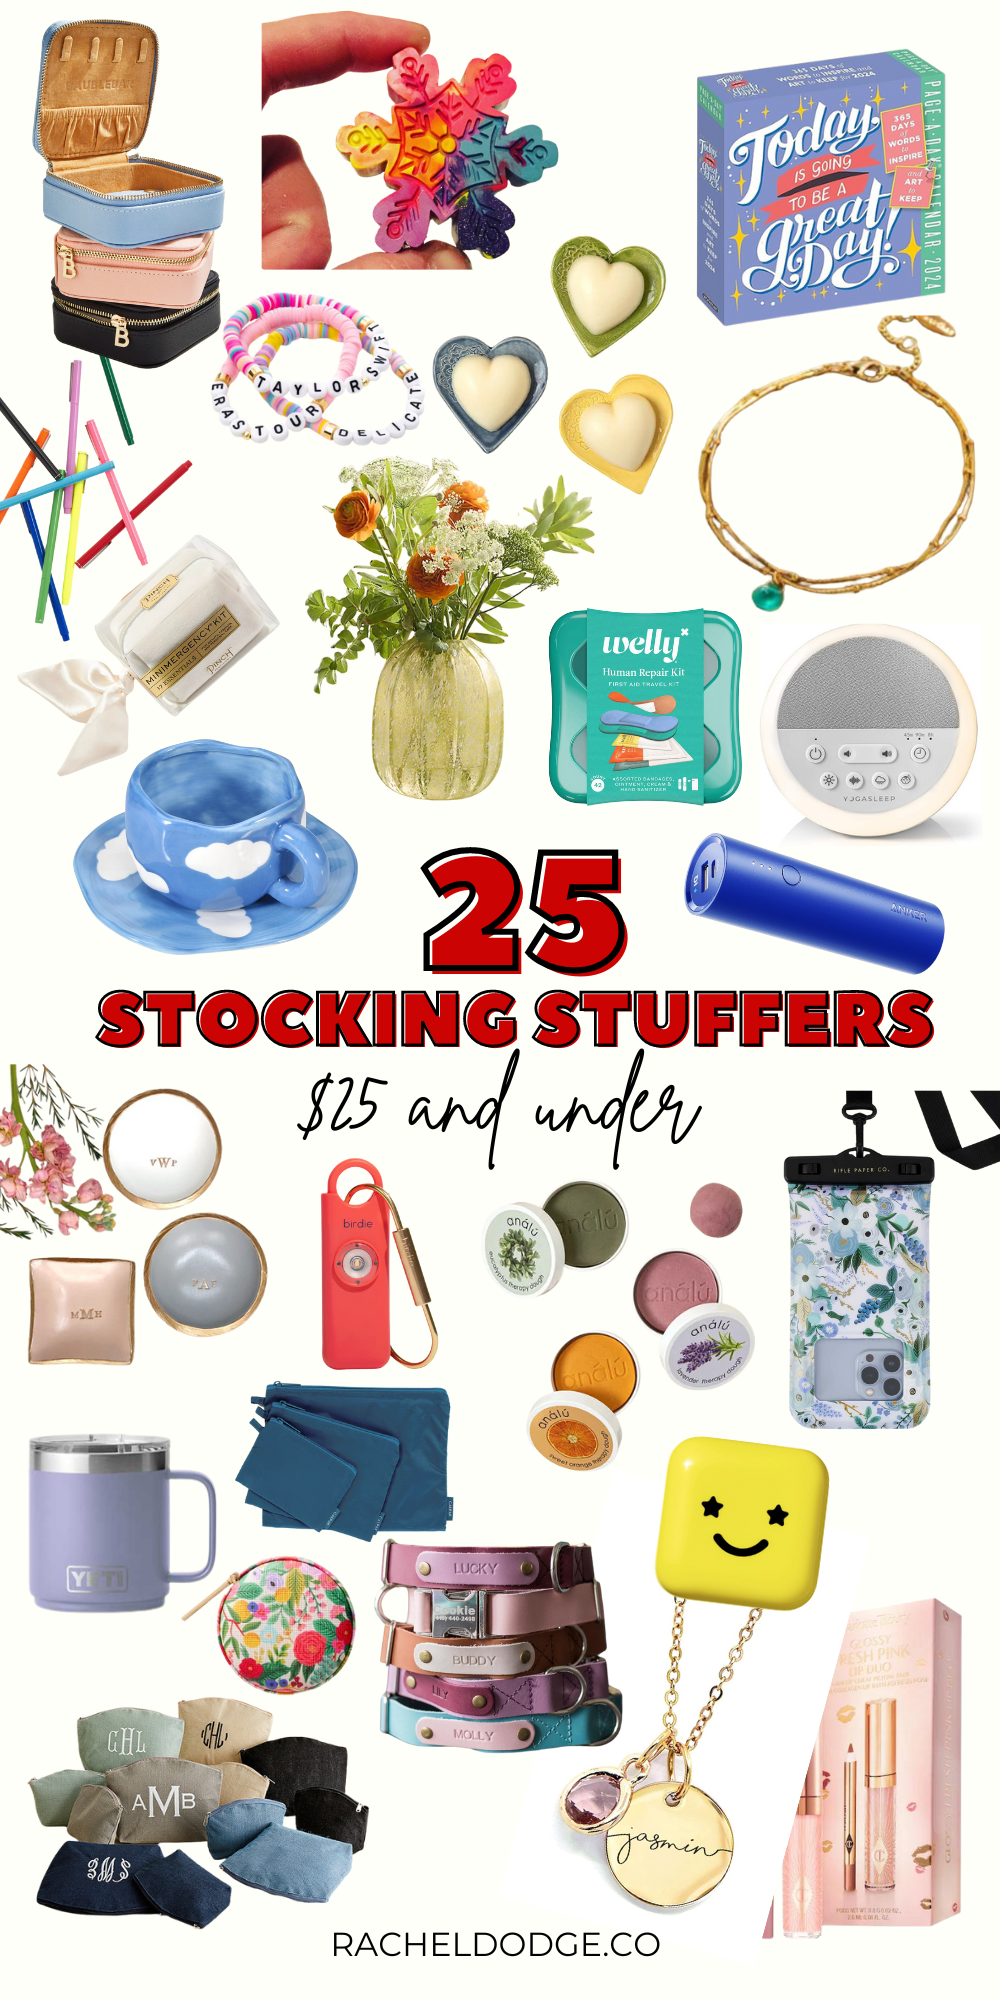 25 Stocking Stuffers $25 and under pin